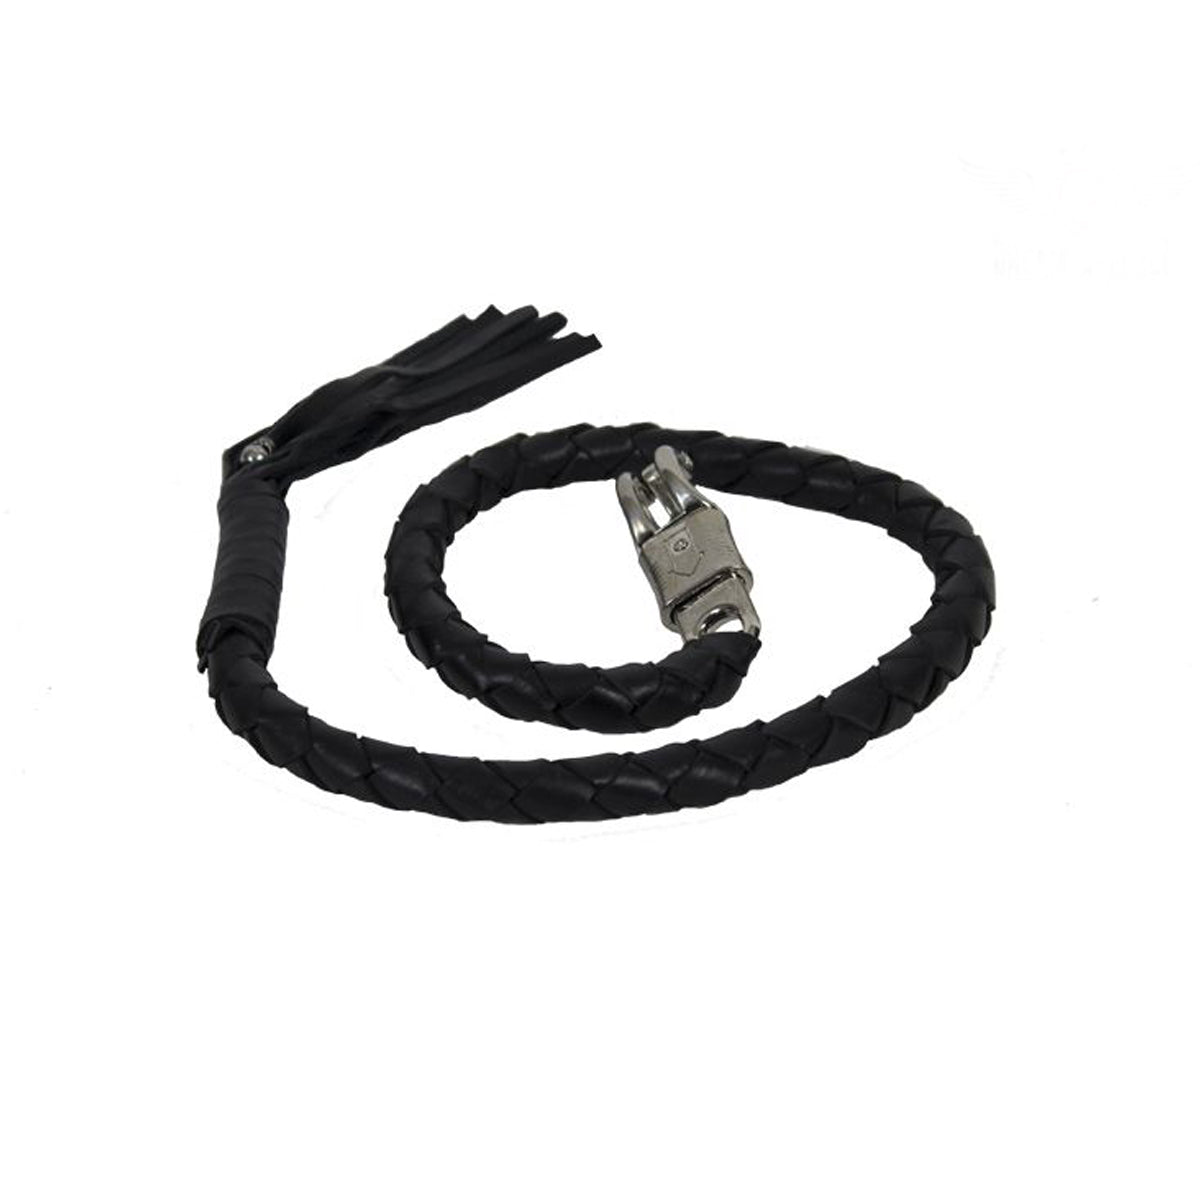 2" Black Get Back Whip for Motorcycles